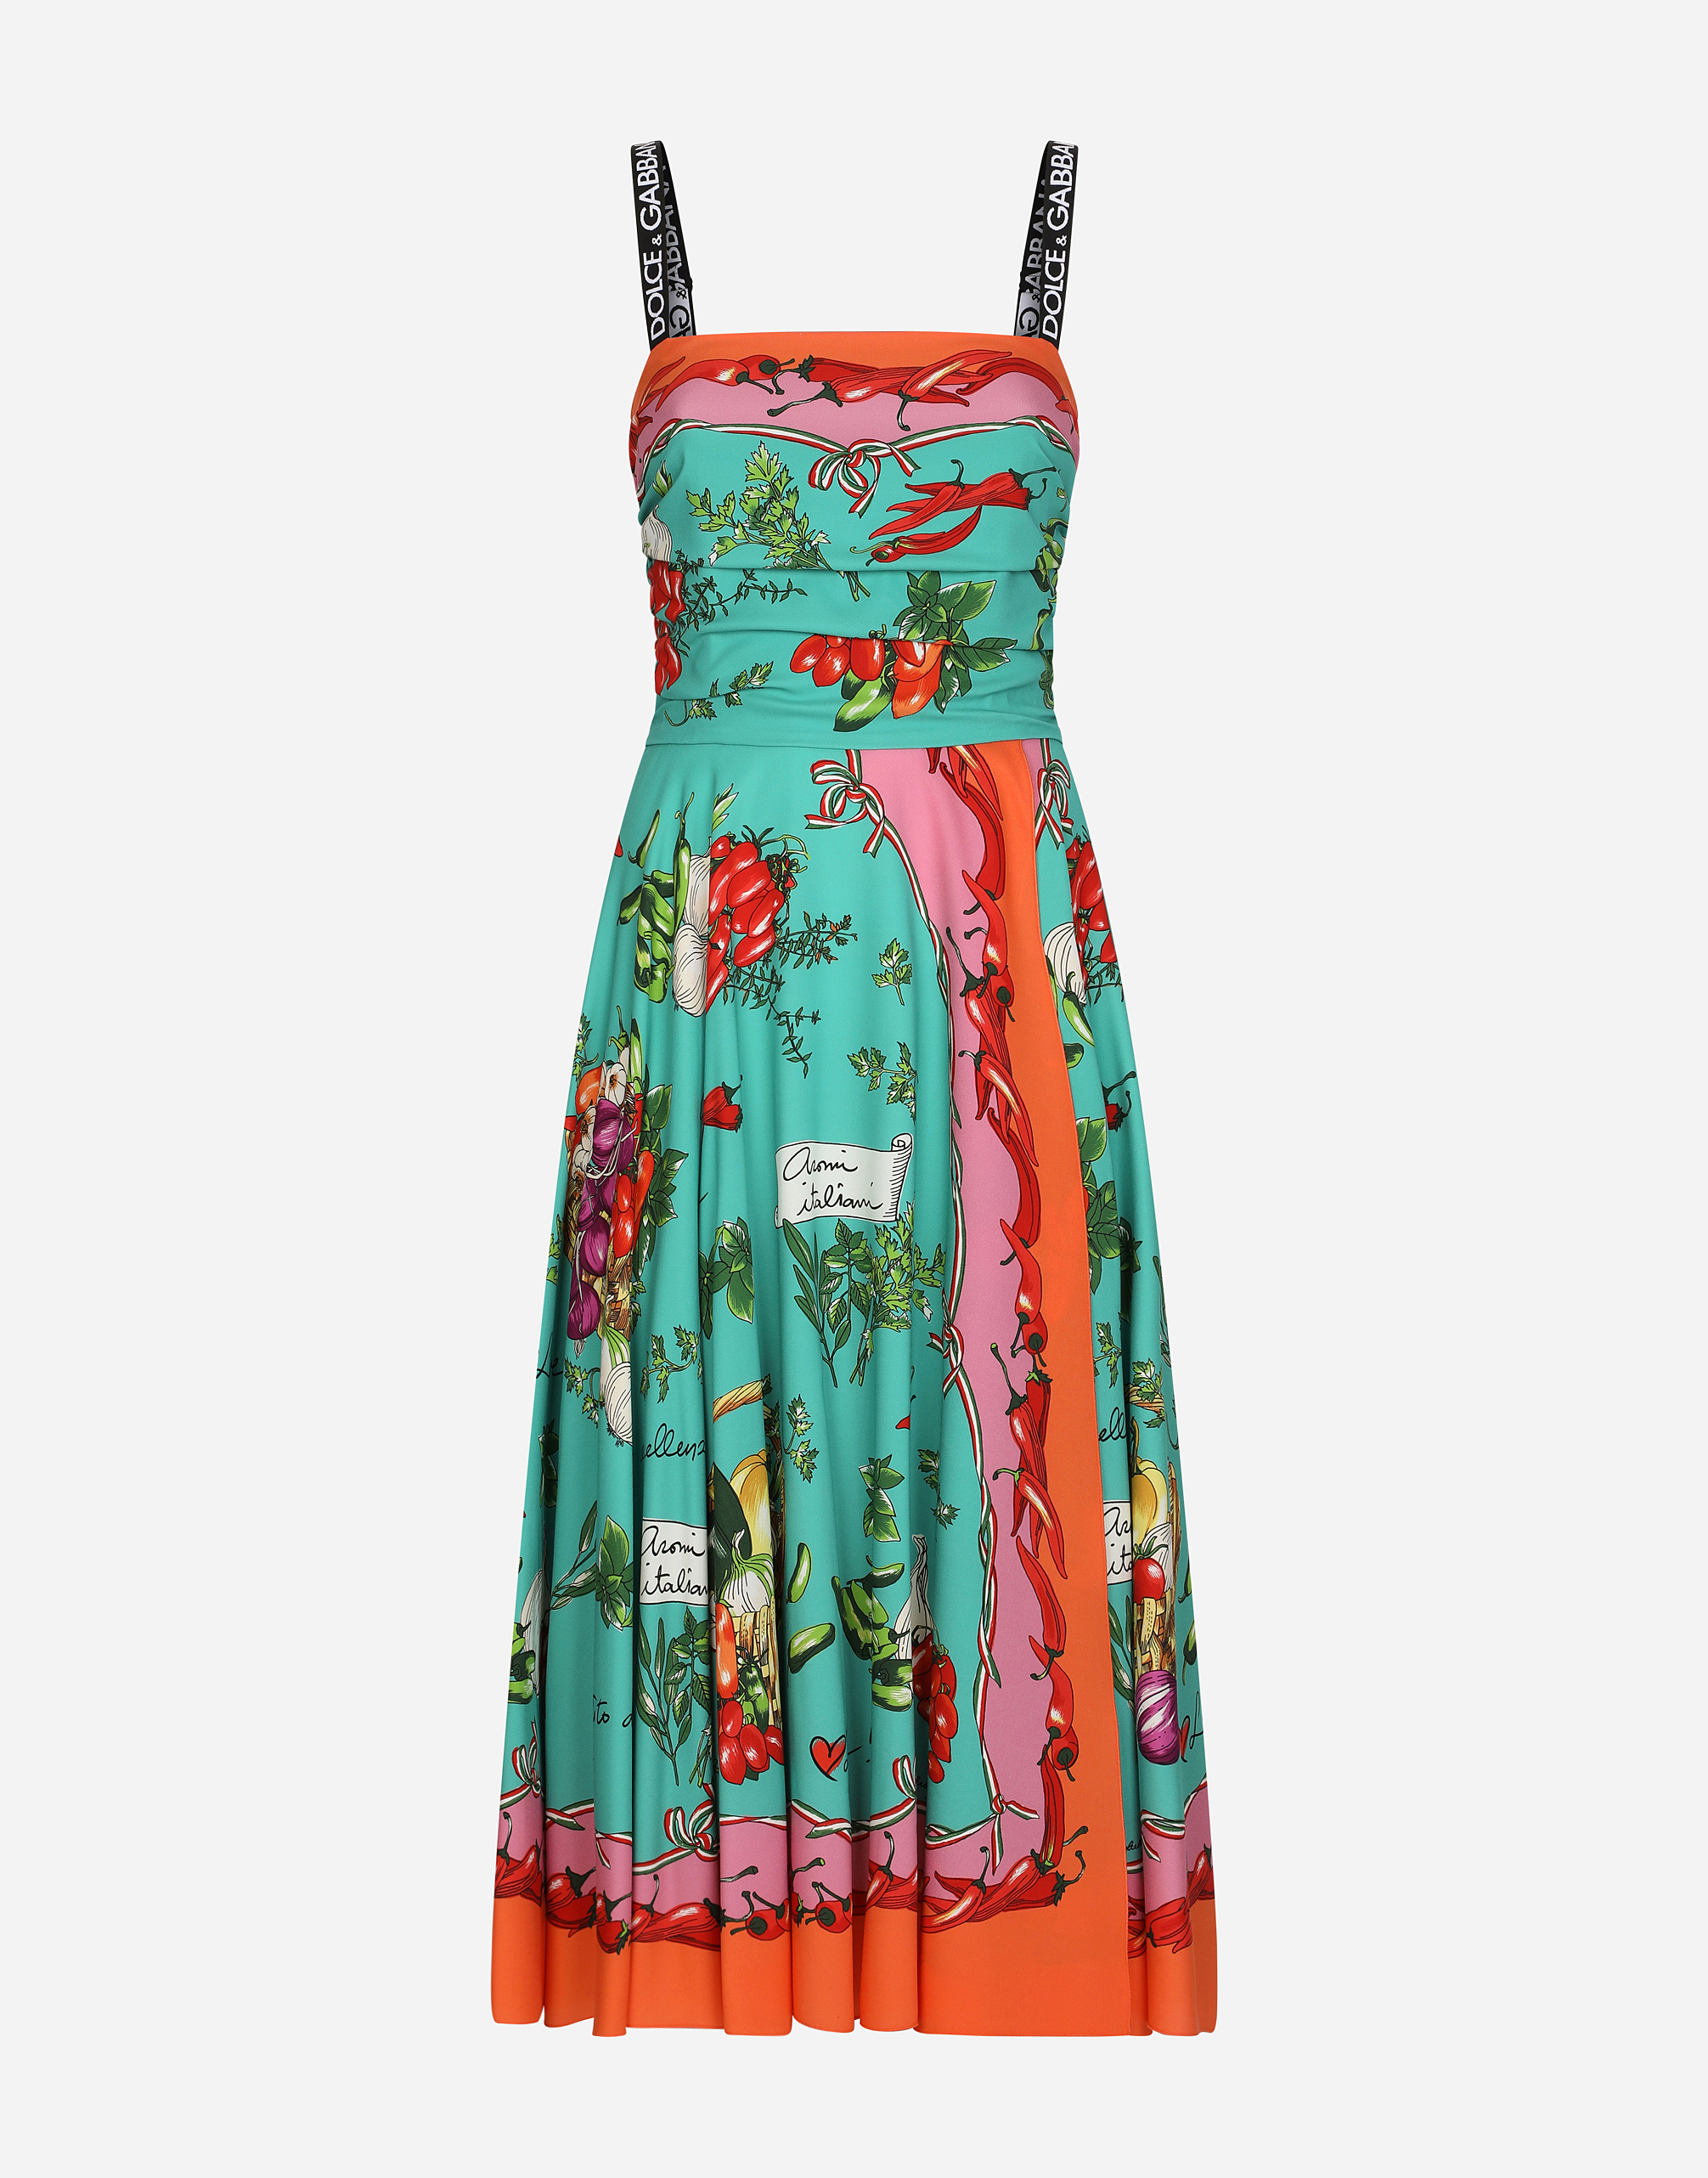 Calf-length scarf dress in vegetable-print charmeuse in Multicolor